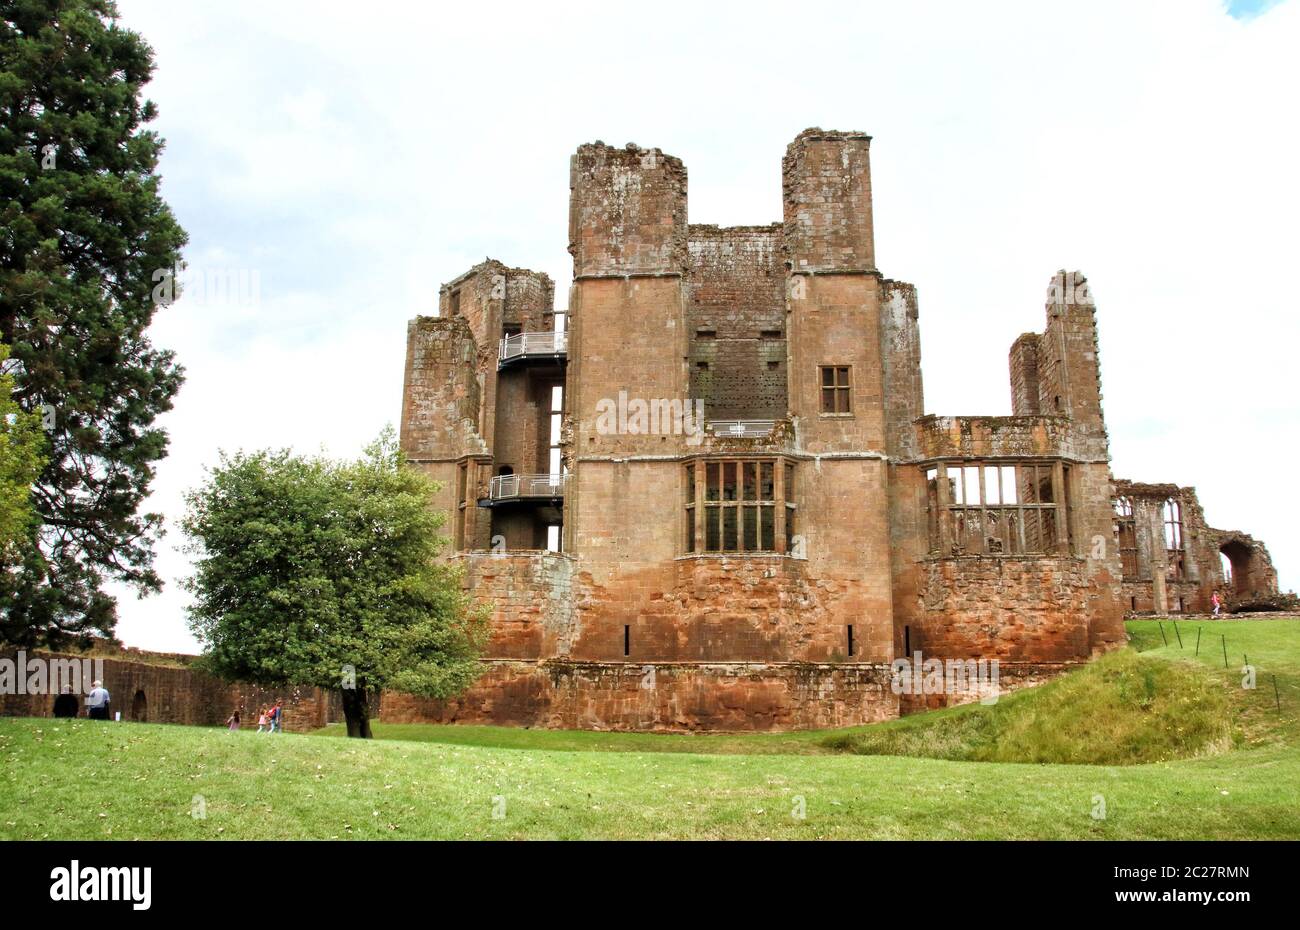 Kenilworth, UK. 16th June, 2020. Kenilworth Castle reopens to the publicSix sites managed by the English Heritage have reopened to the public this week after closing amid the coronavirus outbreak. Kenilworth Castle and Elizabethan Gardens in Warwickshire are some of the six sites that have adopted a one way system around the whole site, with separate entrance and exit points, along with social distancing markers. Credit: SOPA Images Limited/Alamy Live News Stock Photo